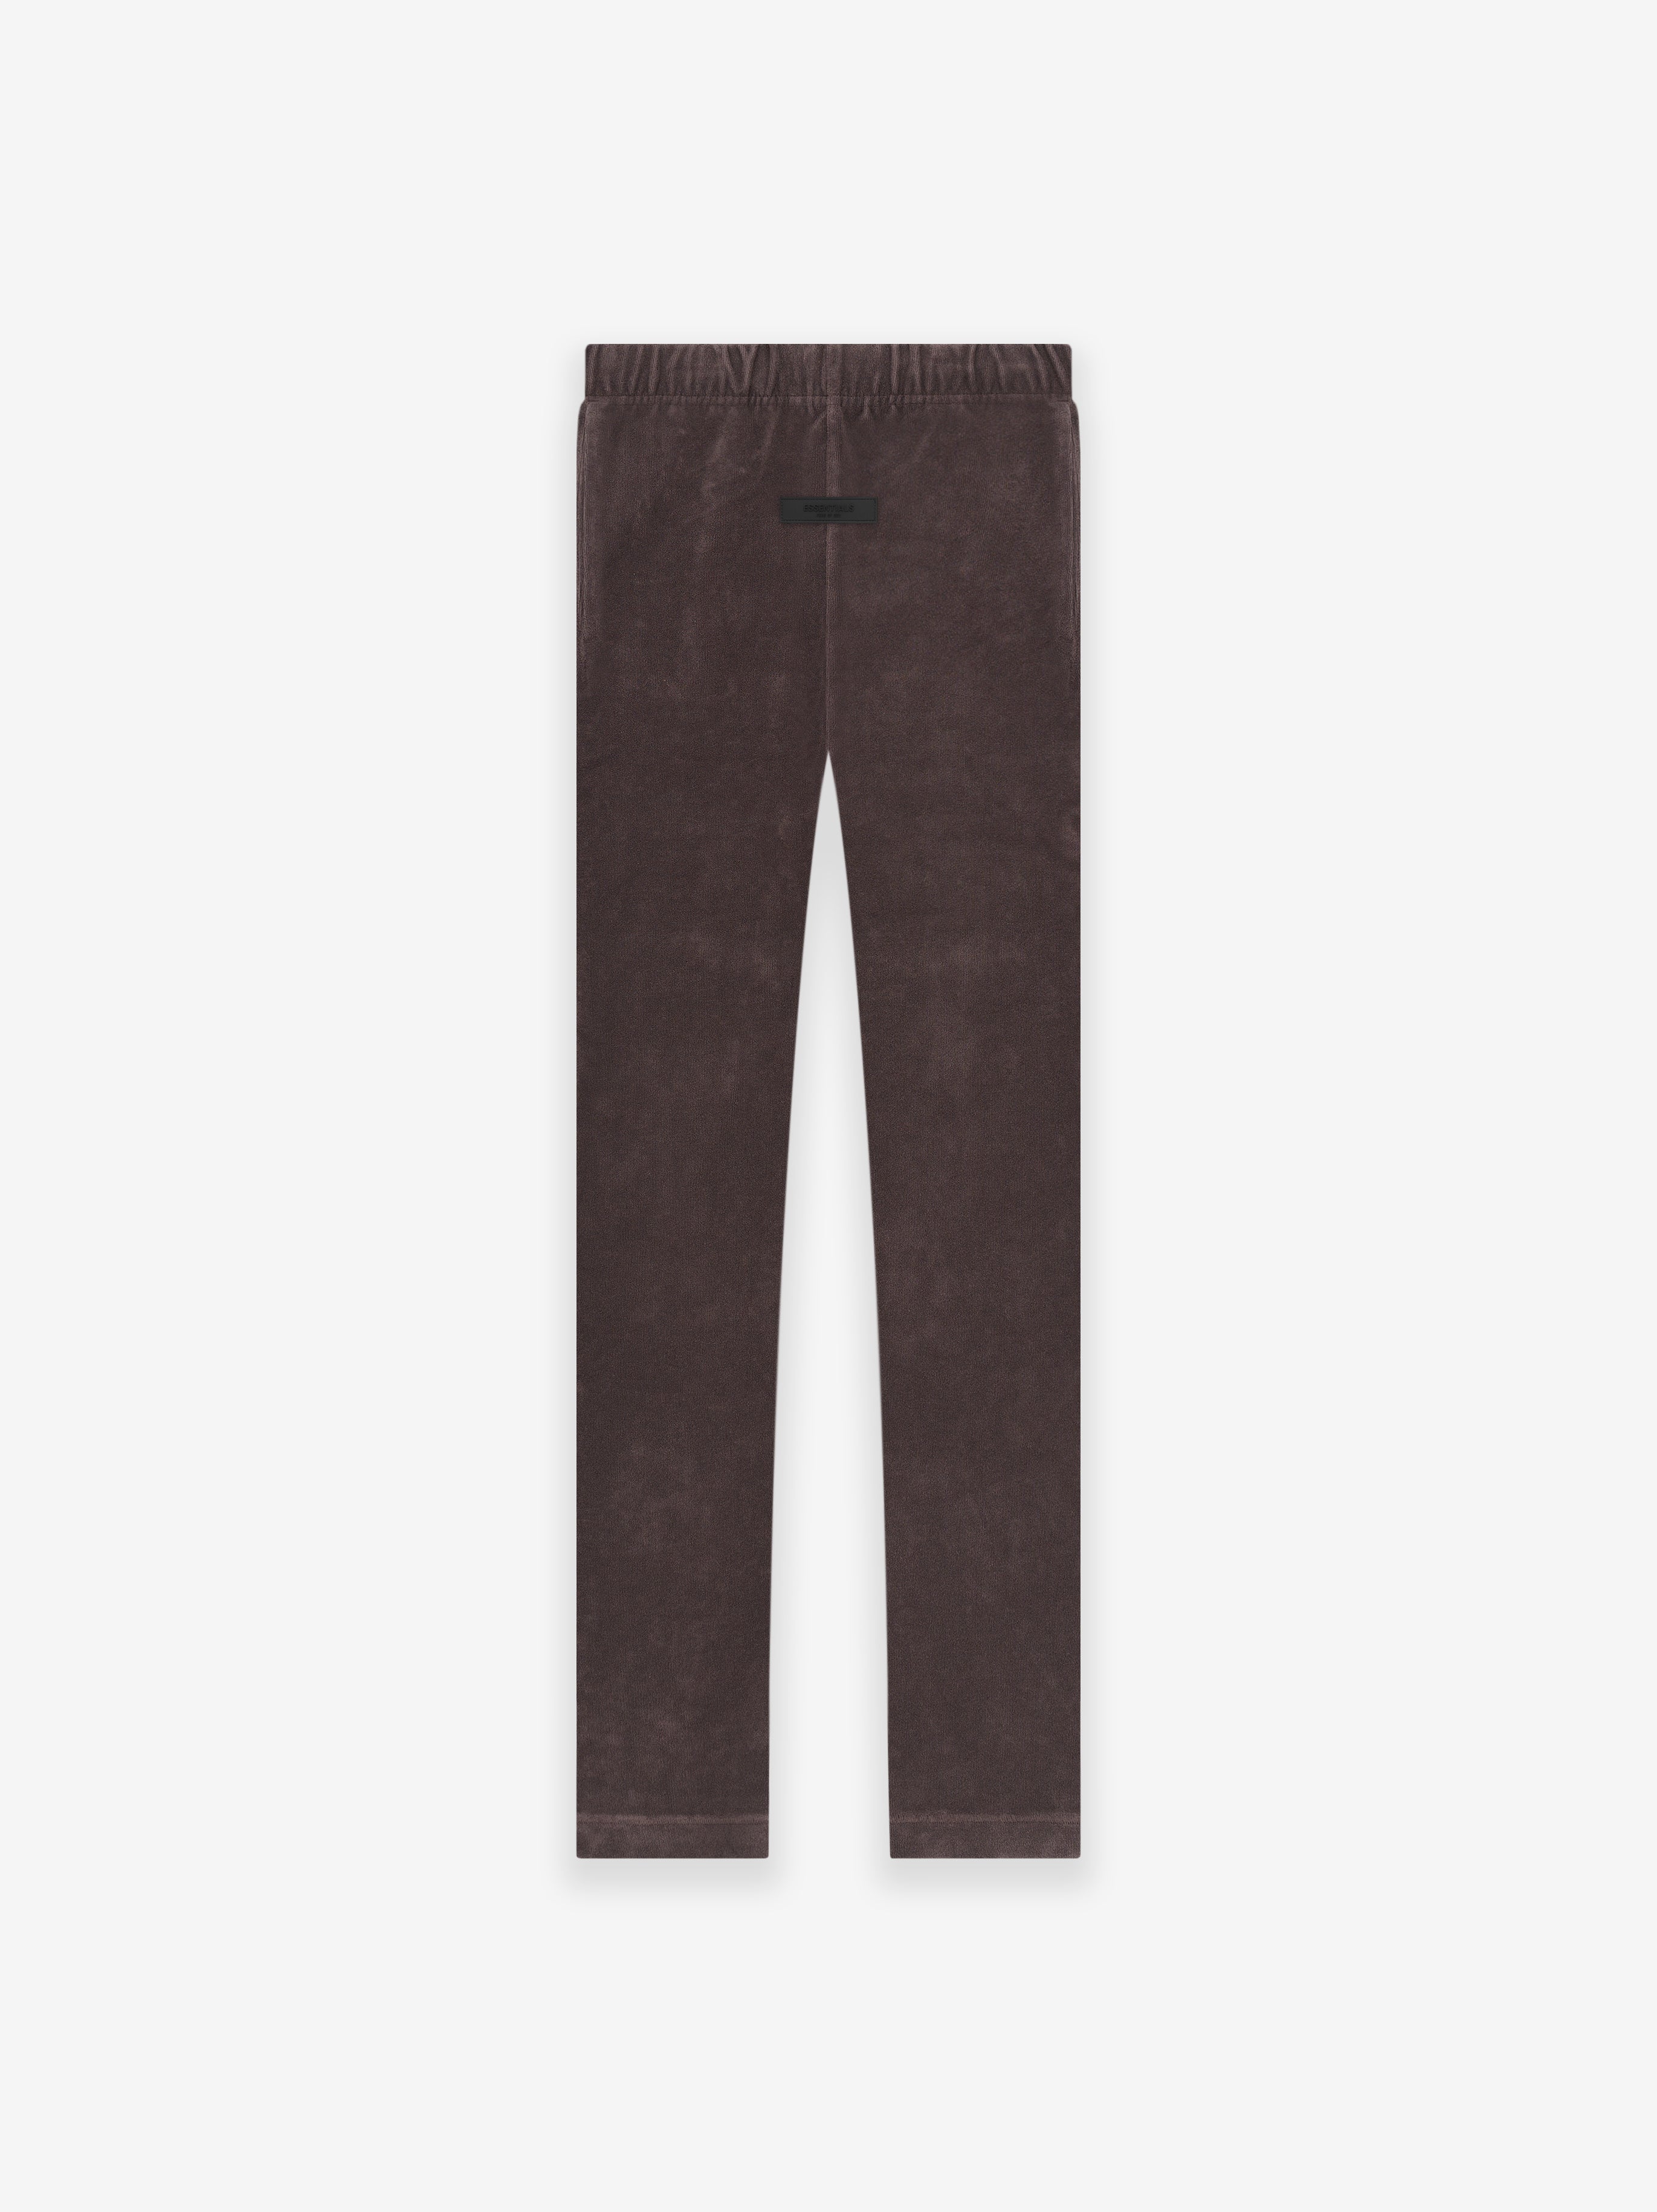 ESSENTIALS Womens Resort Terry Pant in Plum | Fear of God